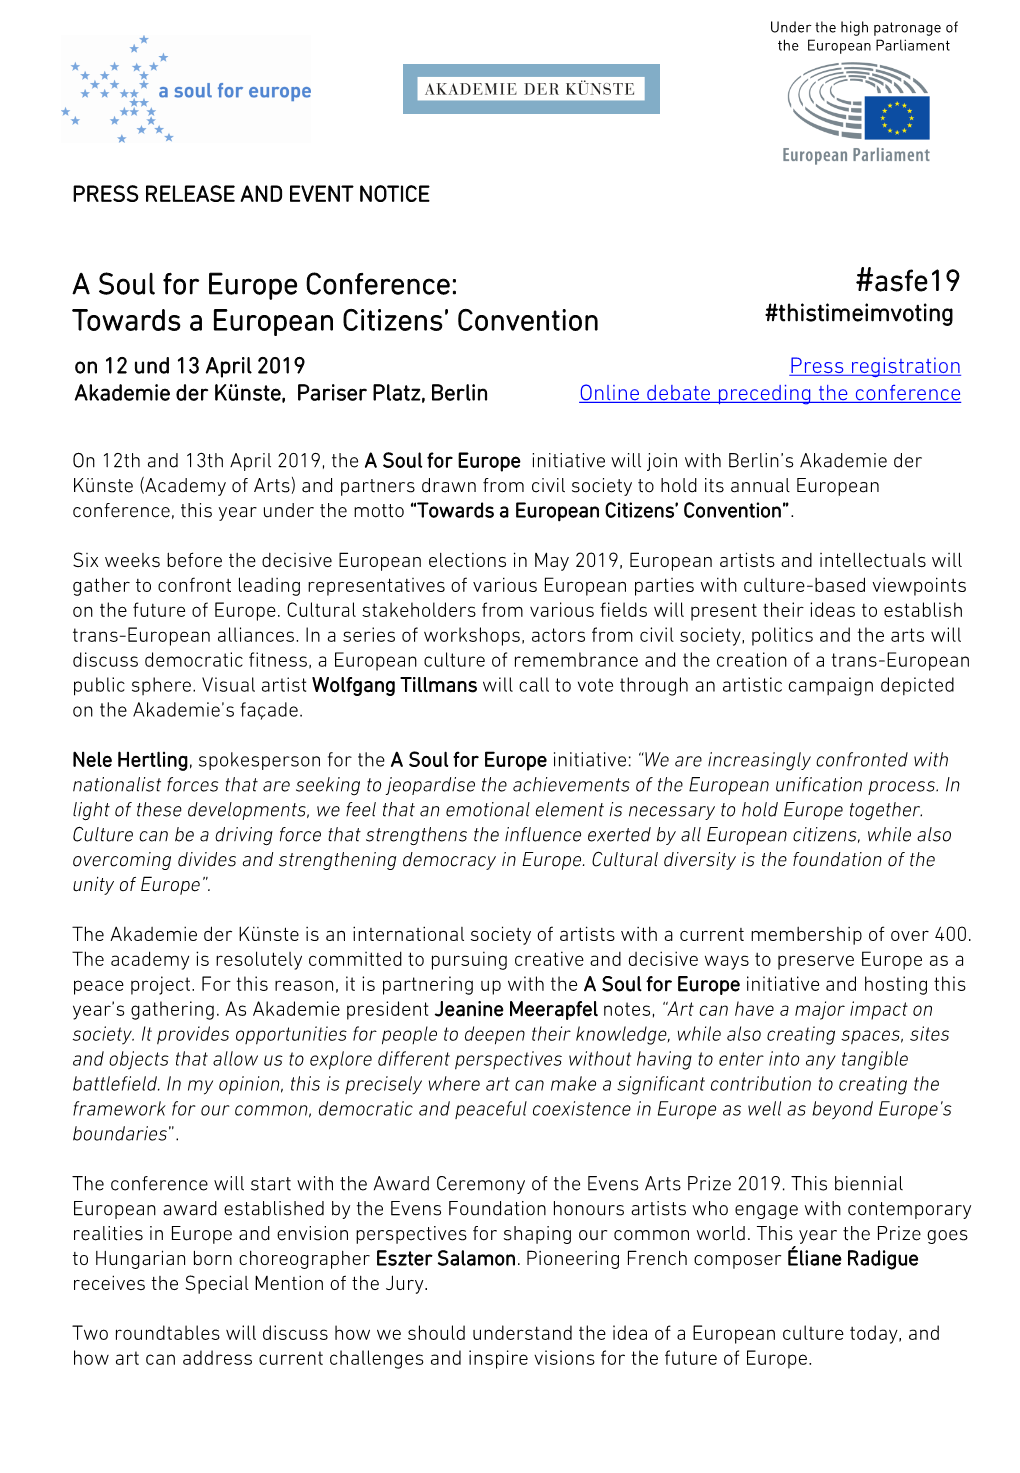 A Soul for Europe Conference: #Asfe19 Towards a European Citizens’ Convention #Thistimeimvoting on 12 Und 13 April 2019 Press Registration